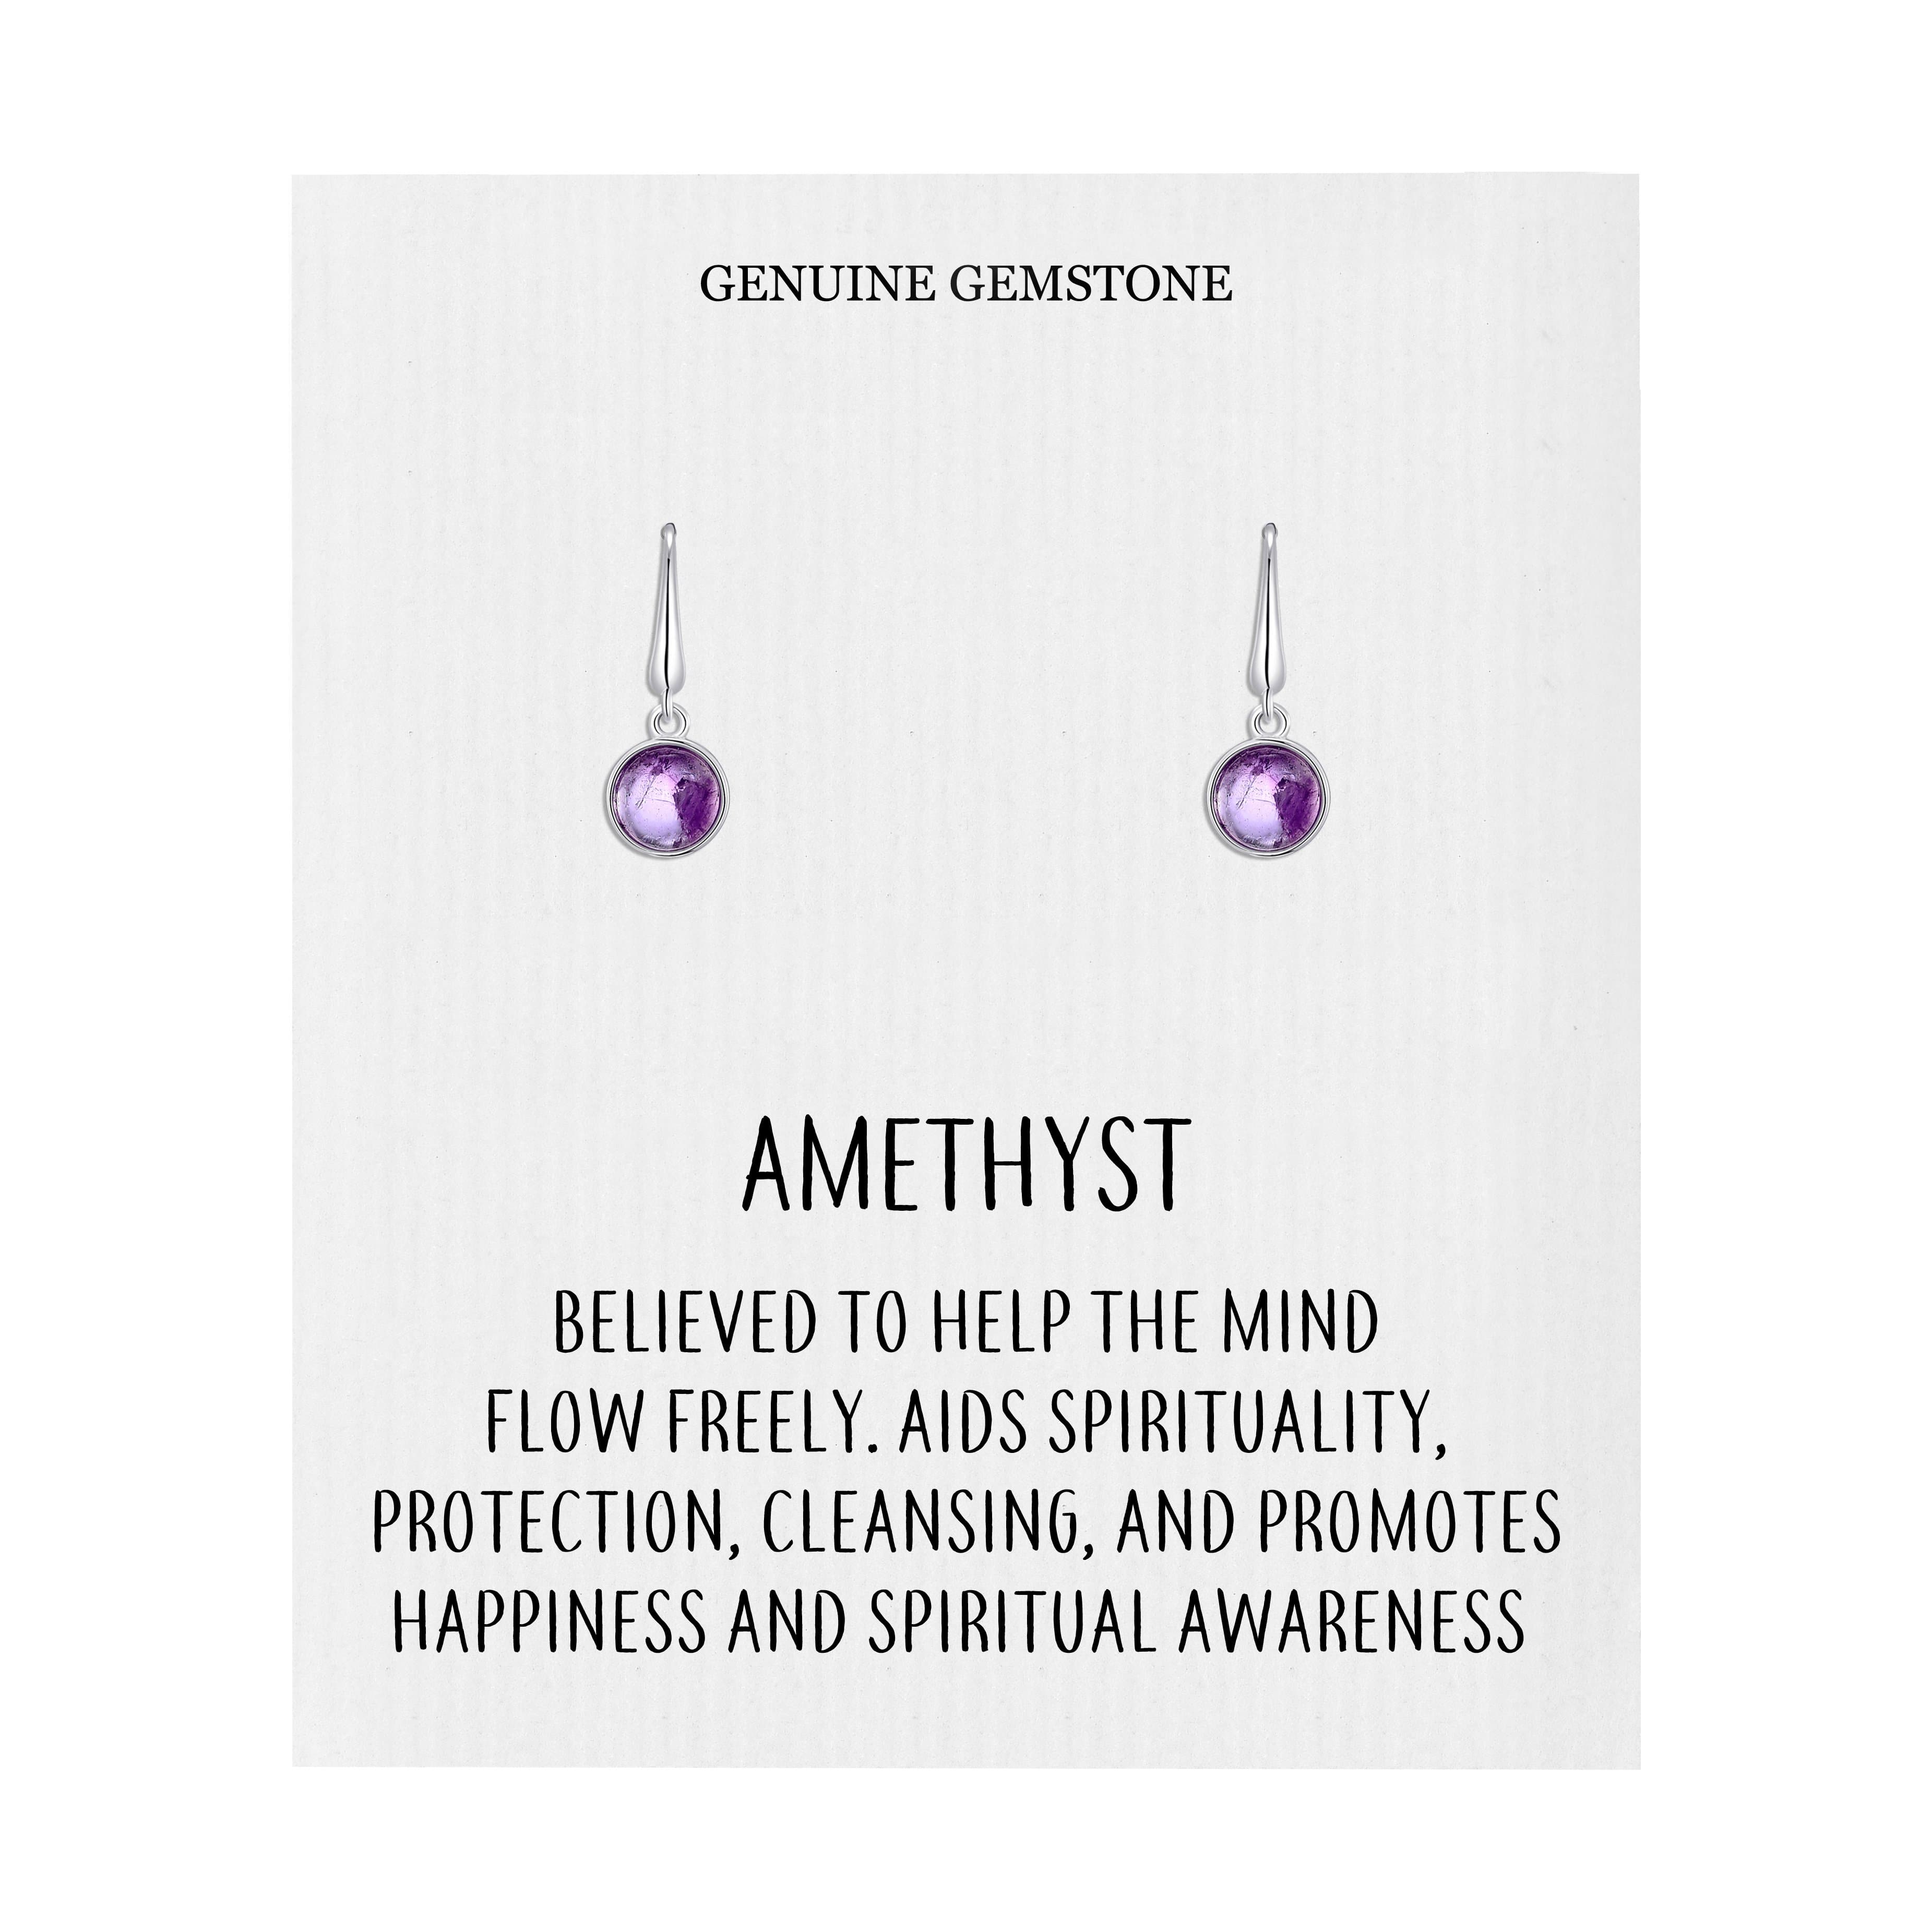 Amethyst Drop Earrings with Quote Card by Philip Jones Jewellery